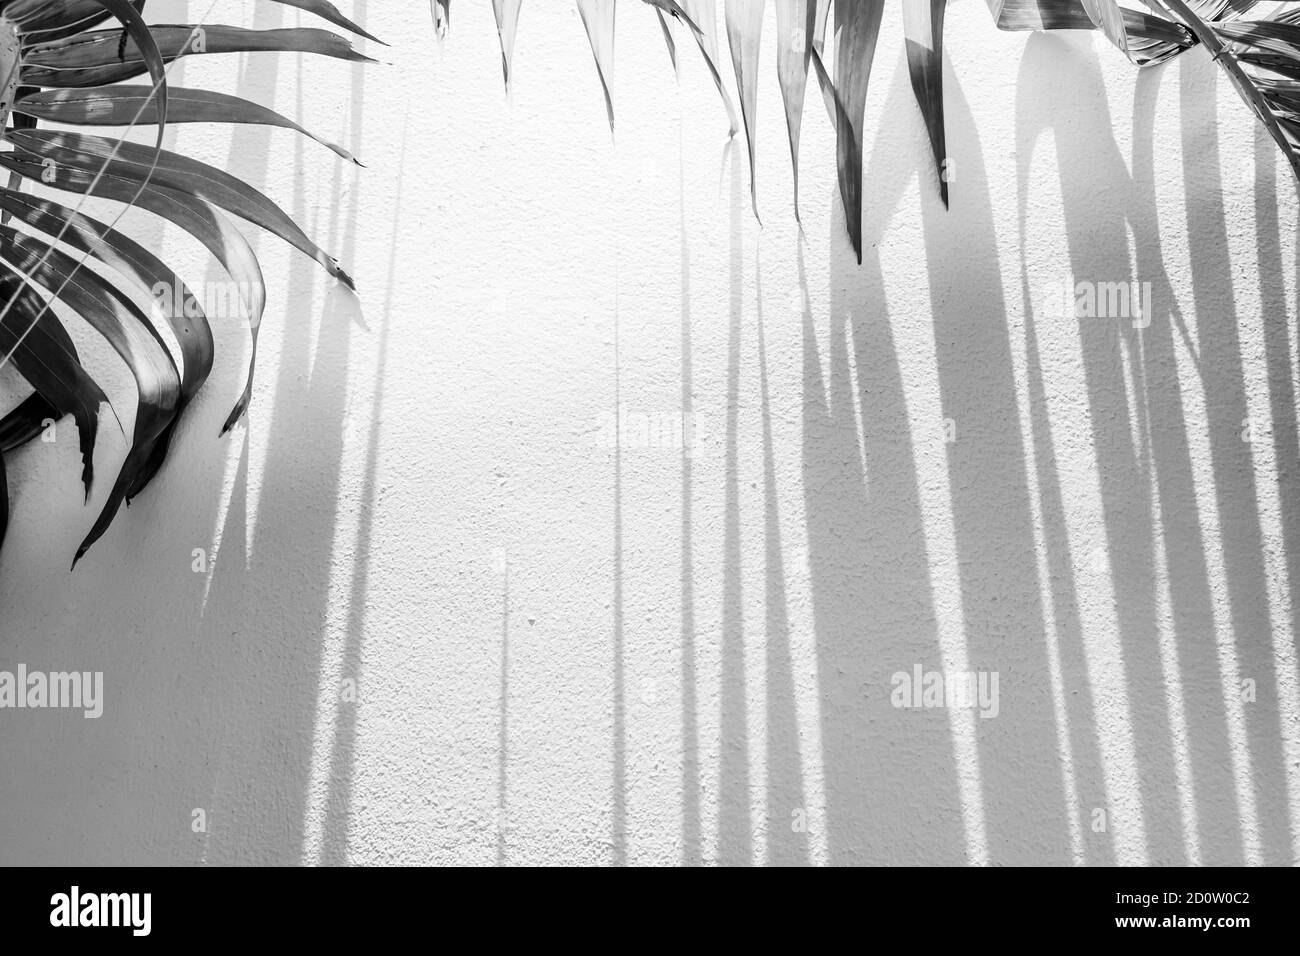 Abstract palm leaves and striped shadow on concrete wall in the background, sunbeam shines through palm leaves onto the wall. Monochrome. Stock Photo